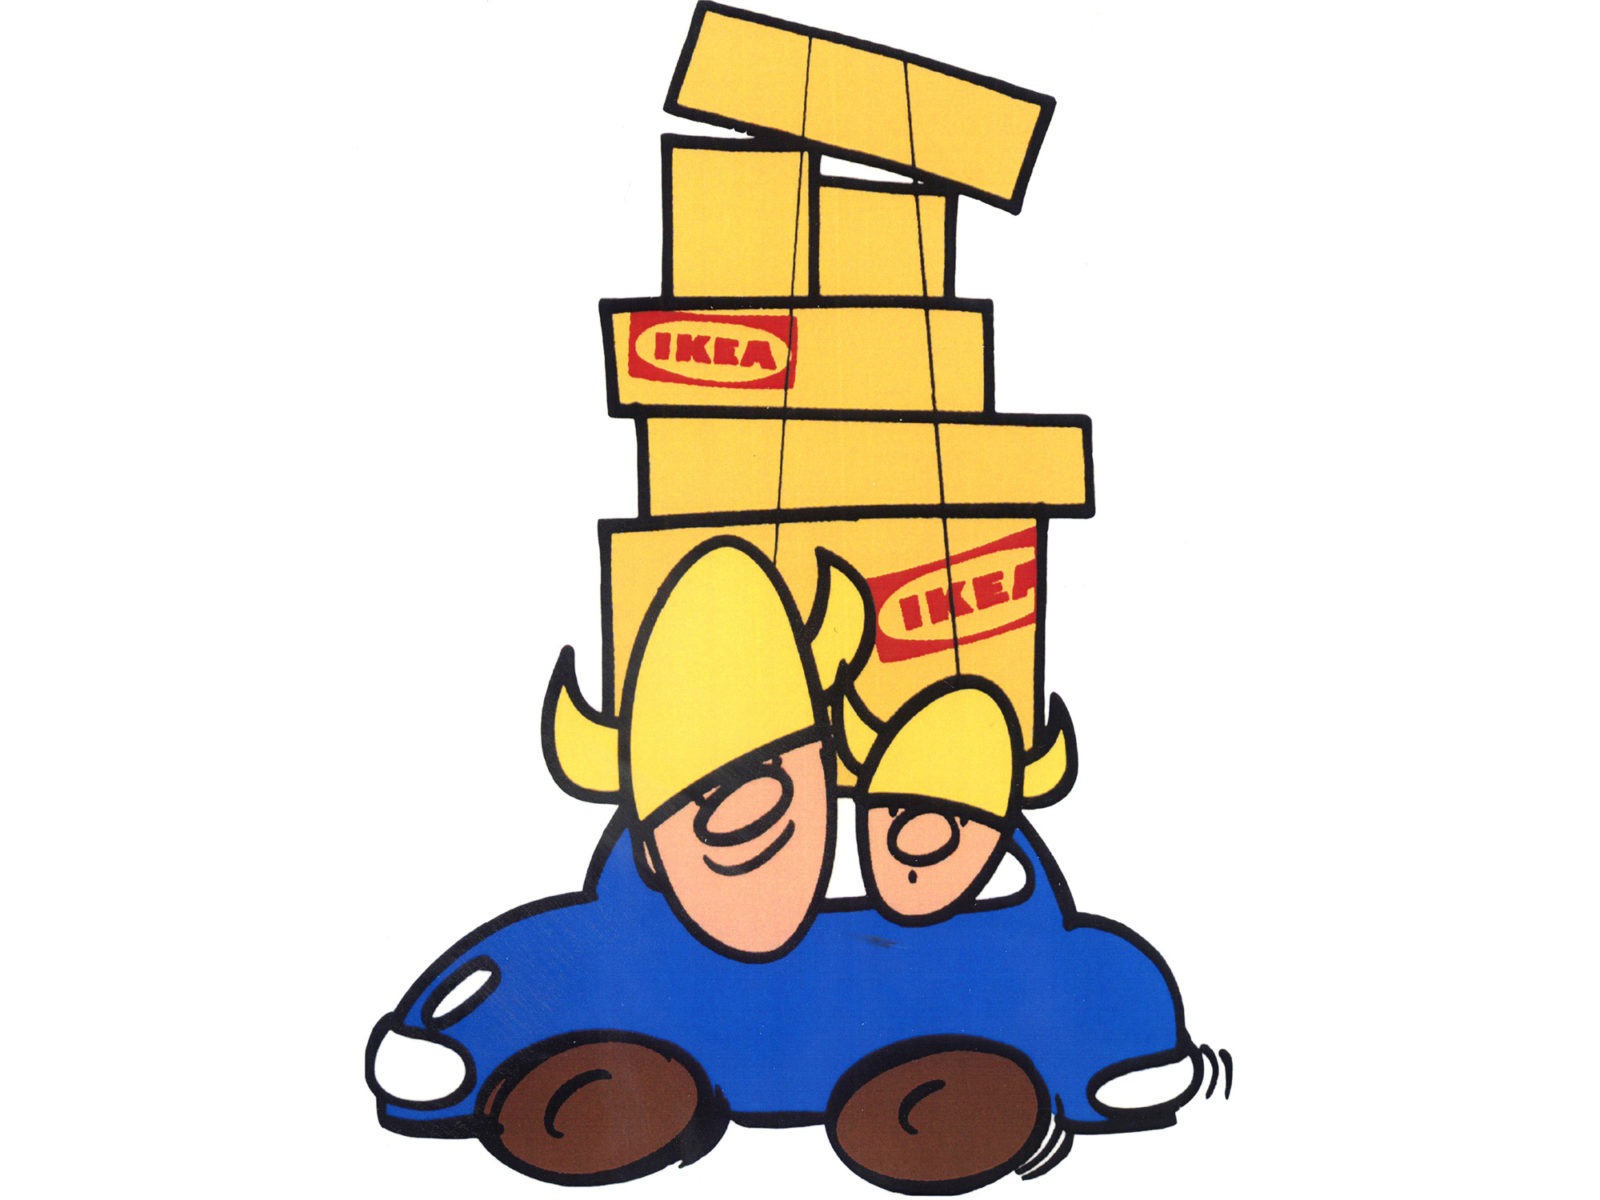 Cartoon drawing of two oversized Vikings crammed into a blue car, a stack of IKEA flat packs on its roof rack.